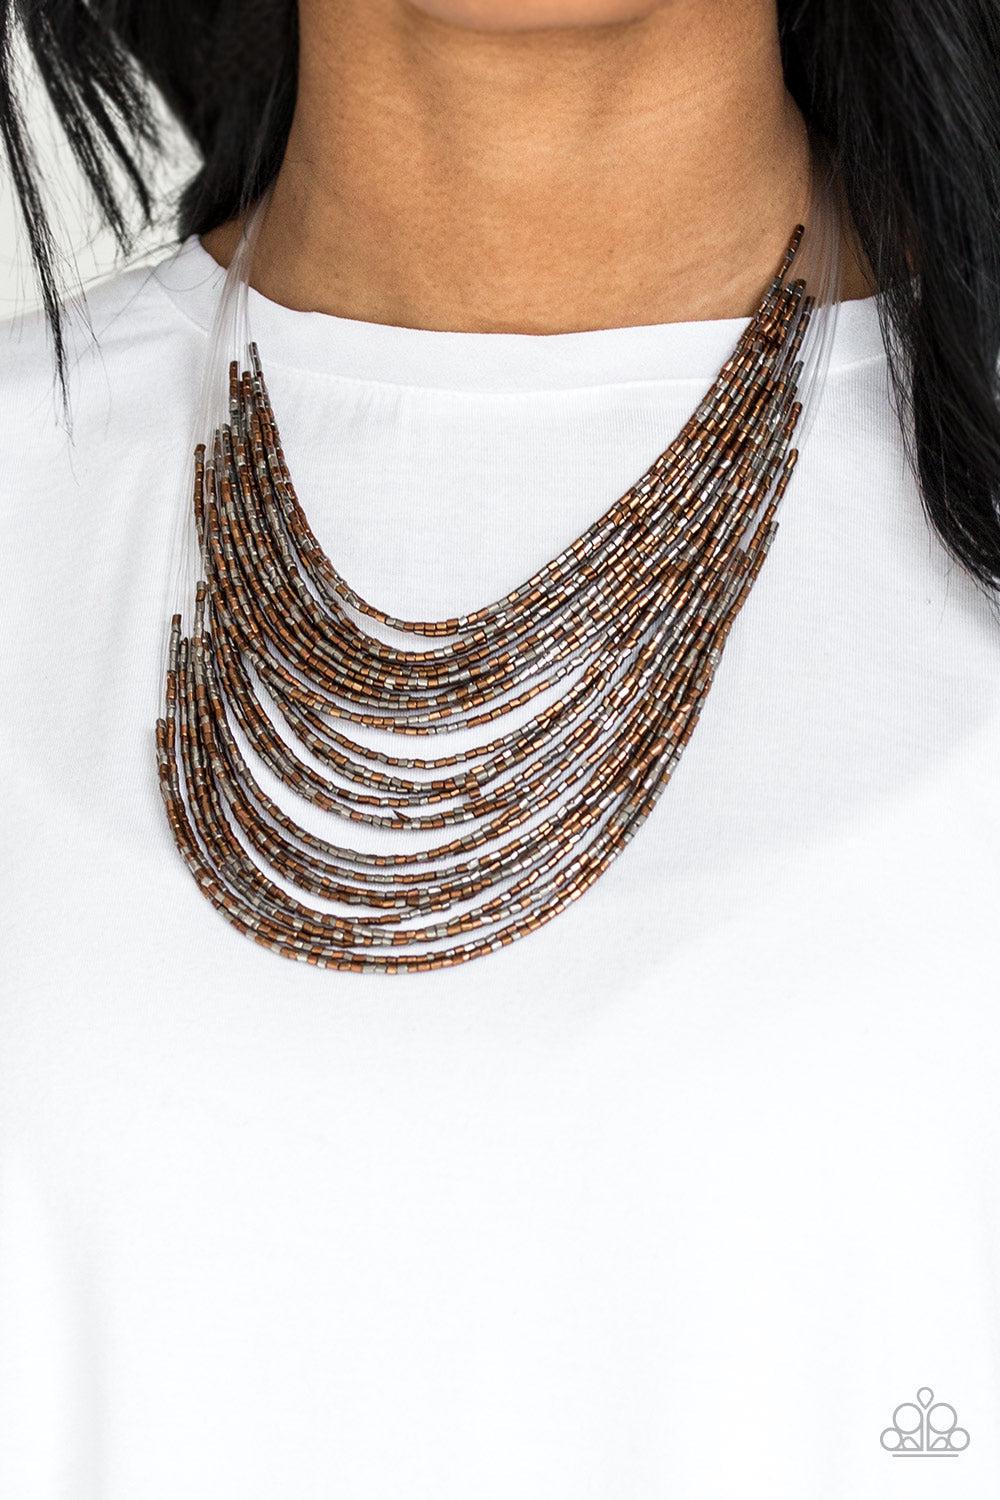 Catwalk Queen Multi Copper &amp; Gunmetal Seed Bead Necklace - Paparazzi Accessories- on model - CarasShop.com - $5 Jewelry by Cara Jewels